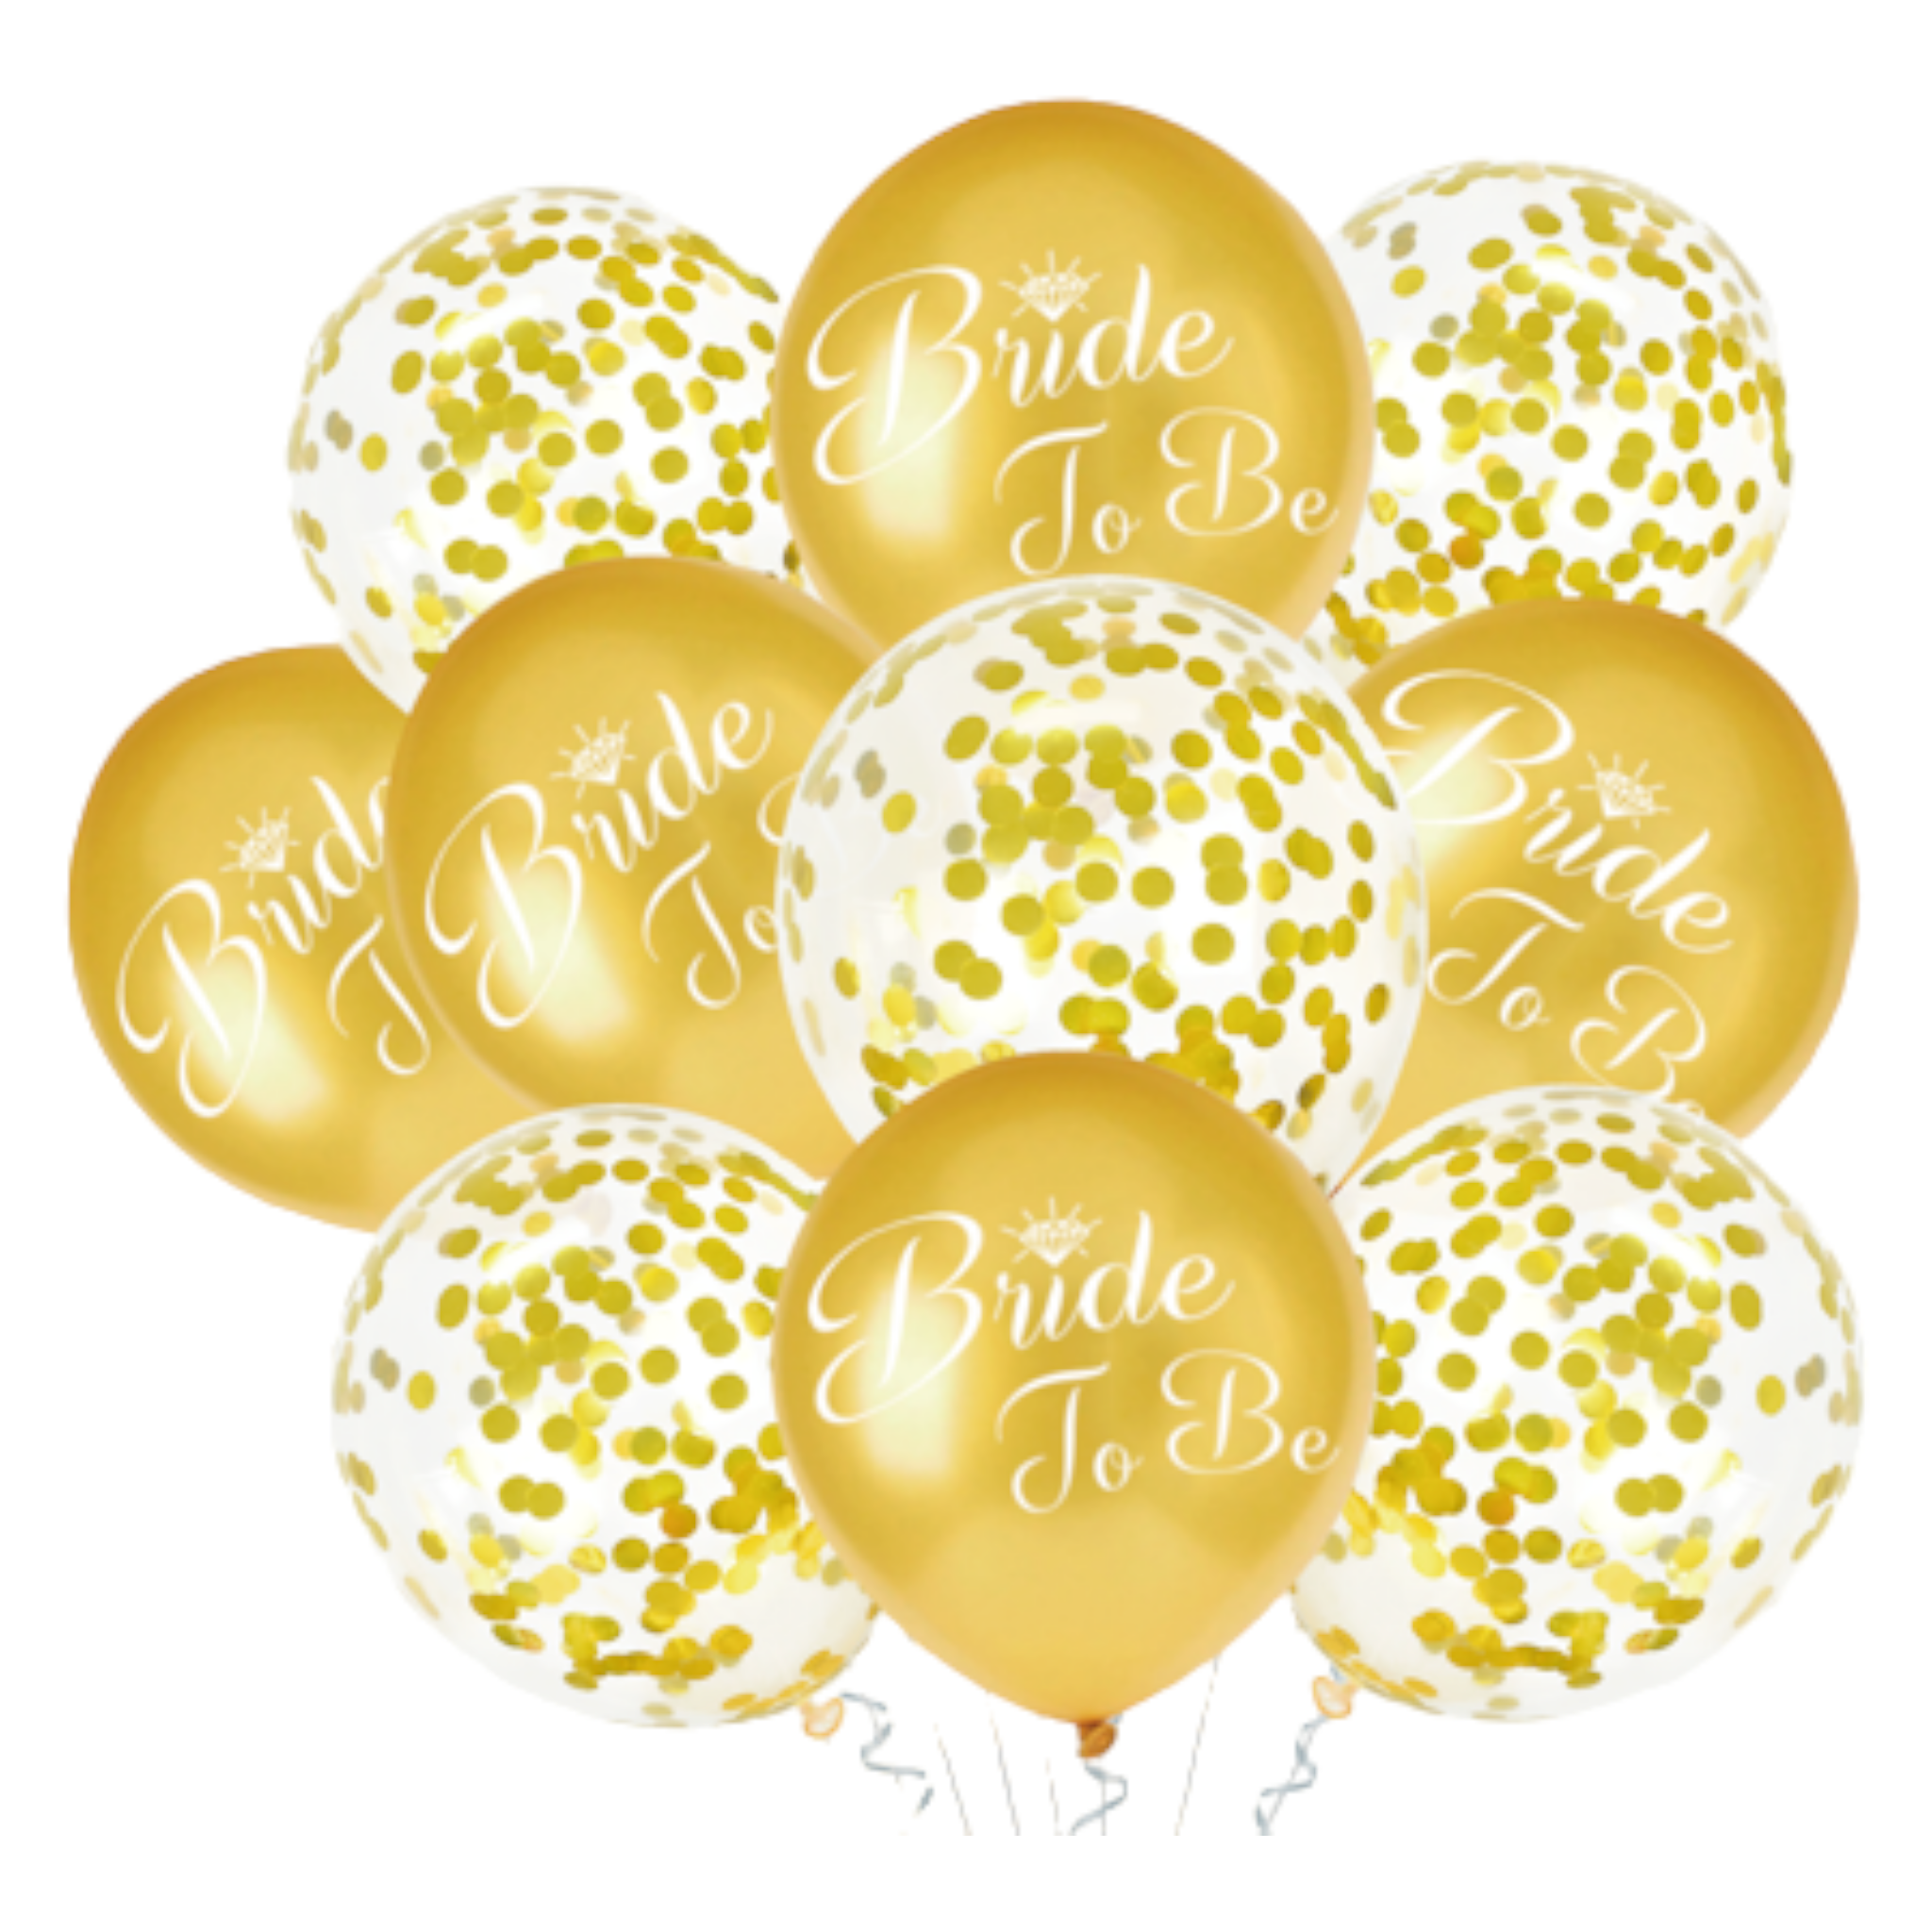 Bride to be Latex Balloons Gold & Clear 8pack